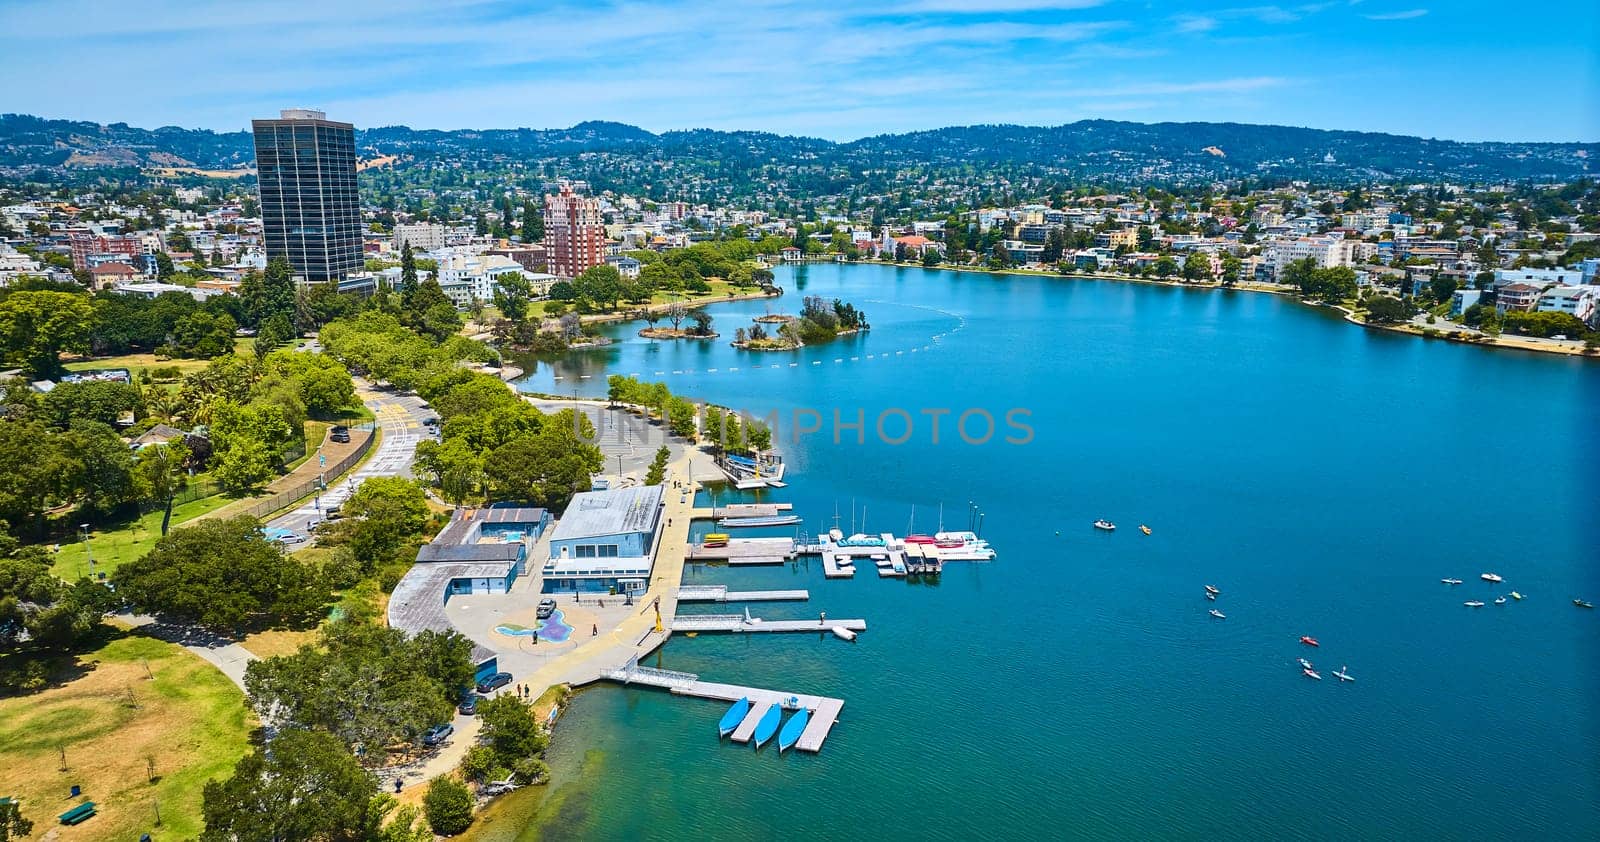 Image of Aerial Lake Merritt Boating Center with Pelican Island in distance with buildings along shore